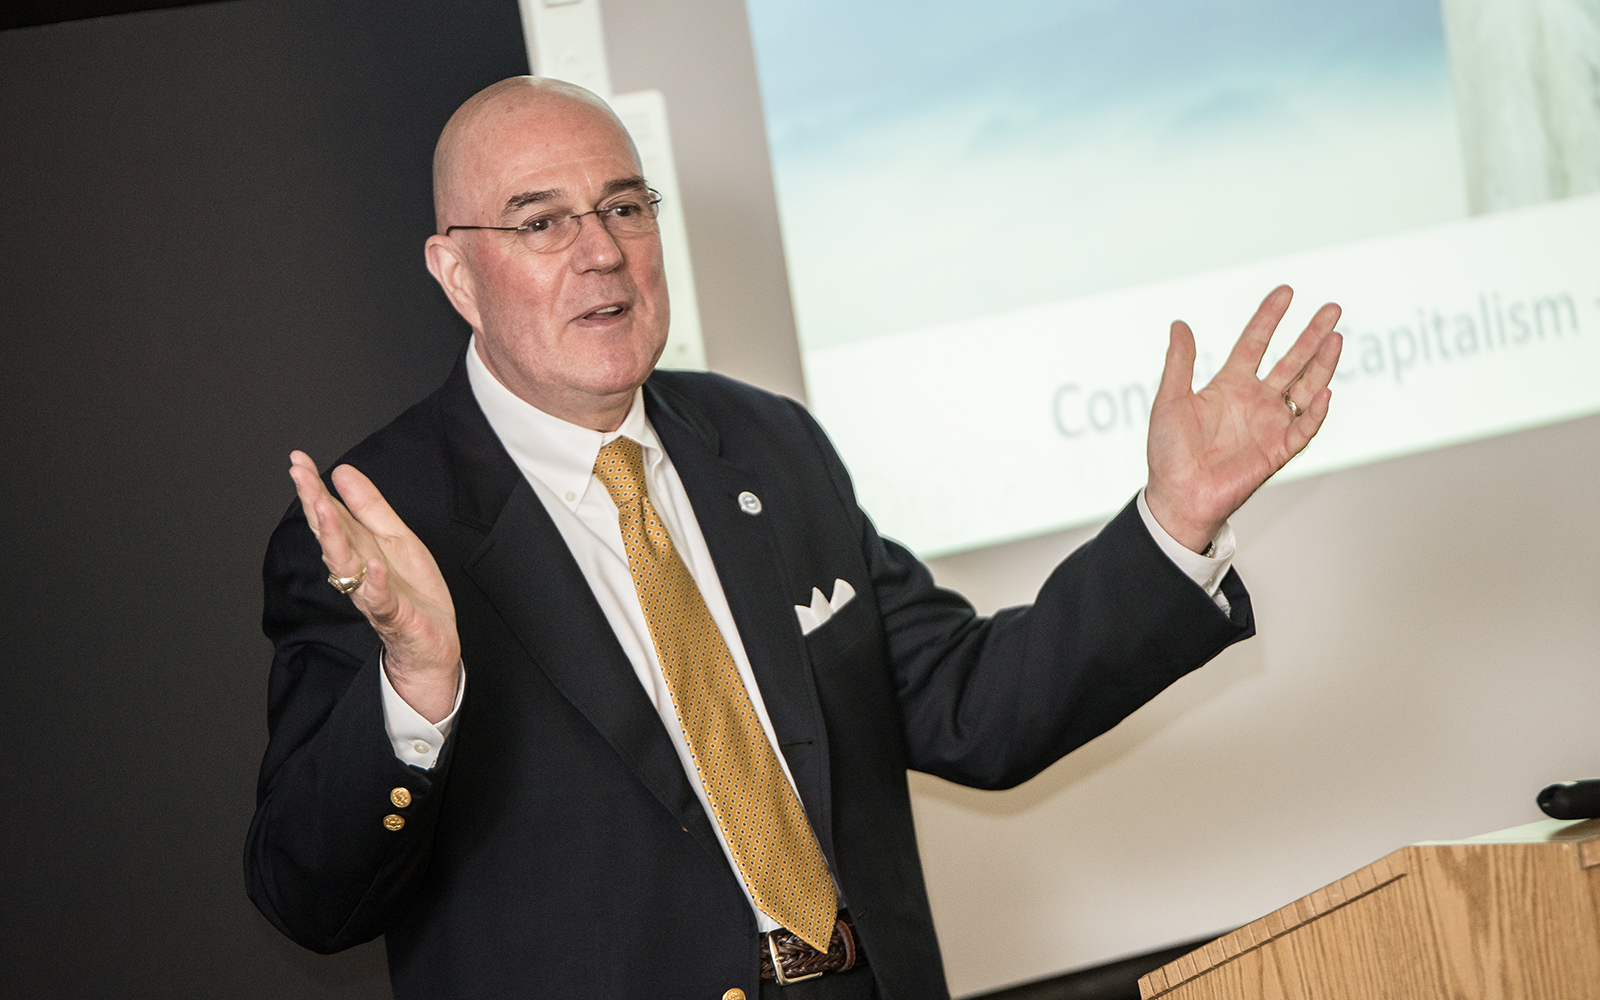 Larry Bingaman, president and chief executive officer of the South Central Connecticut Regional Water Authority, speaks to students about conscious capitalism. (Nathan Oldham/UConn School of Business)